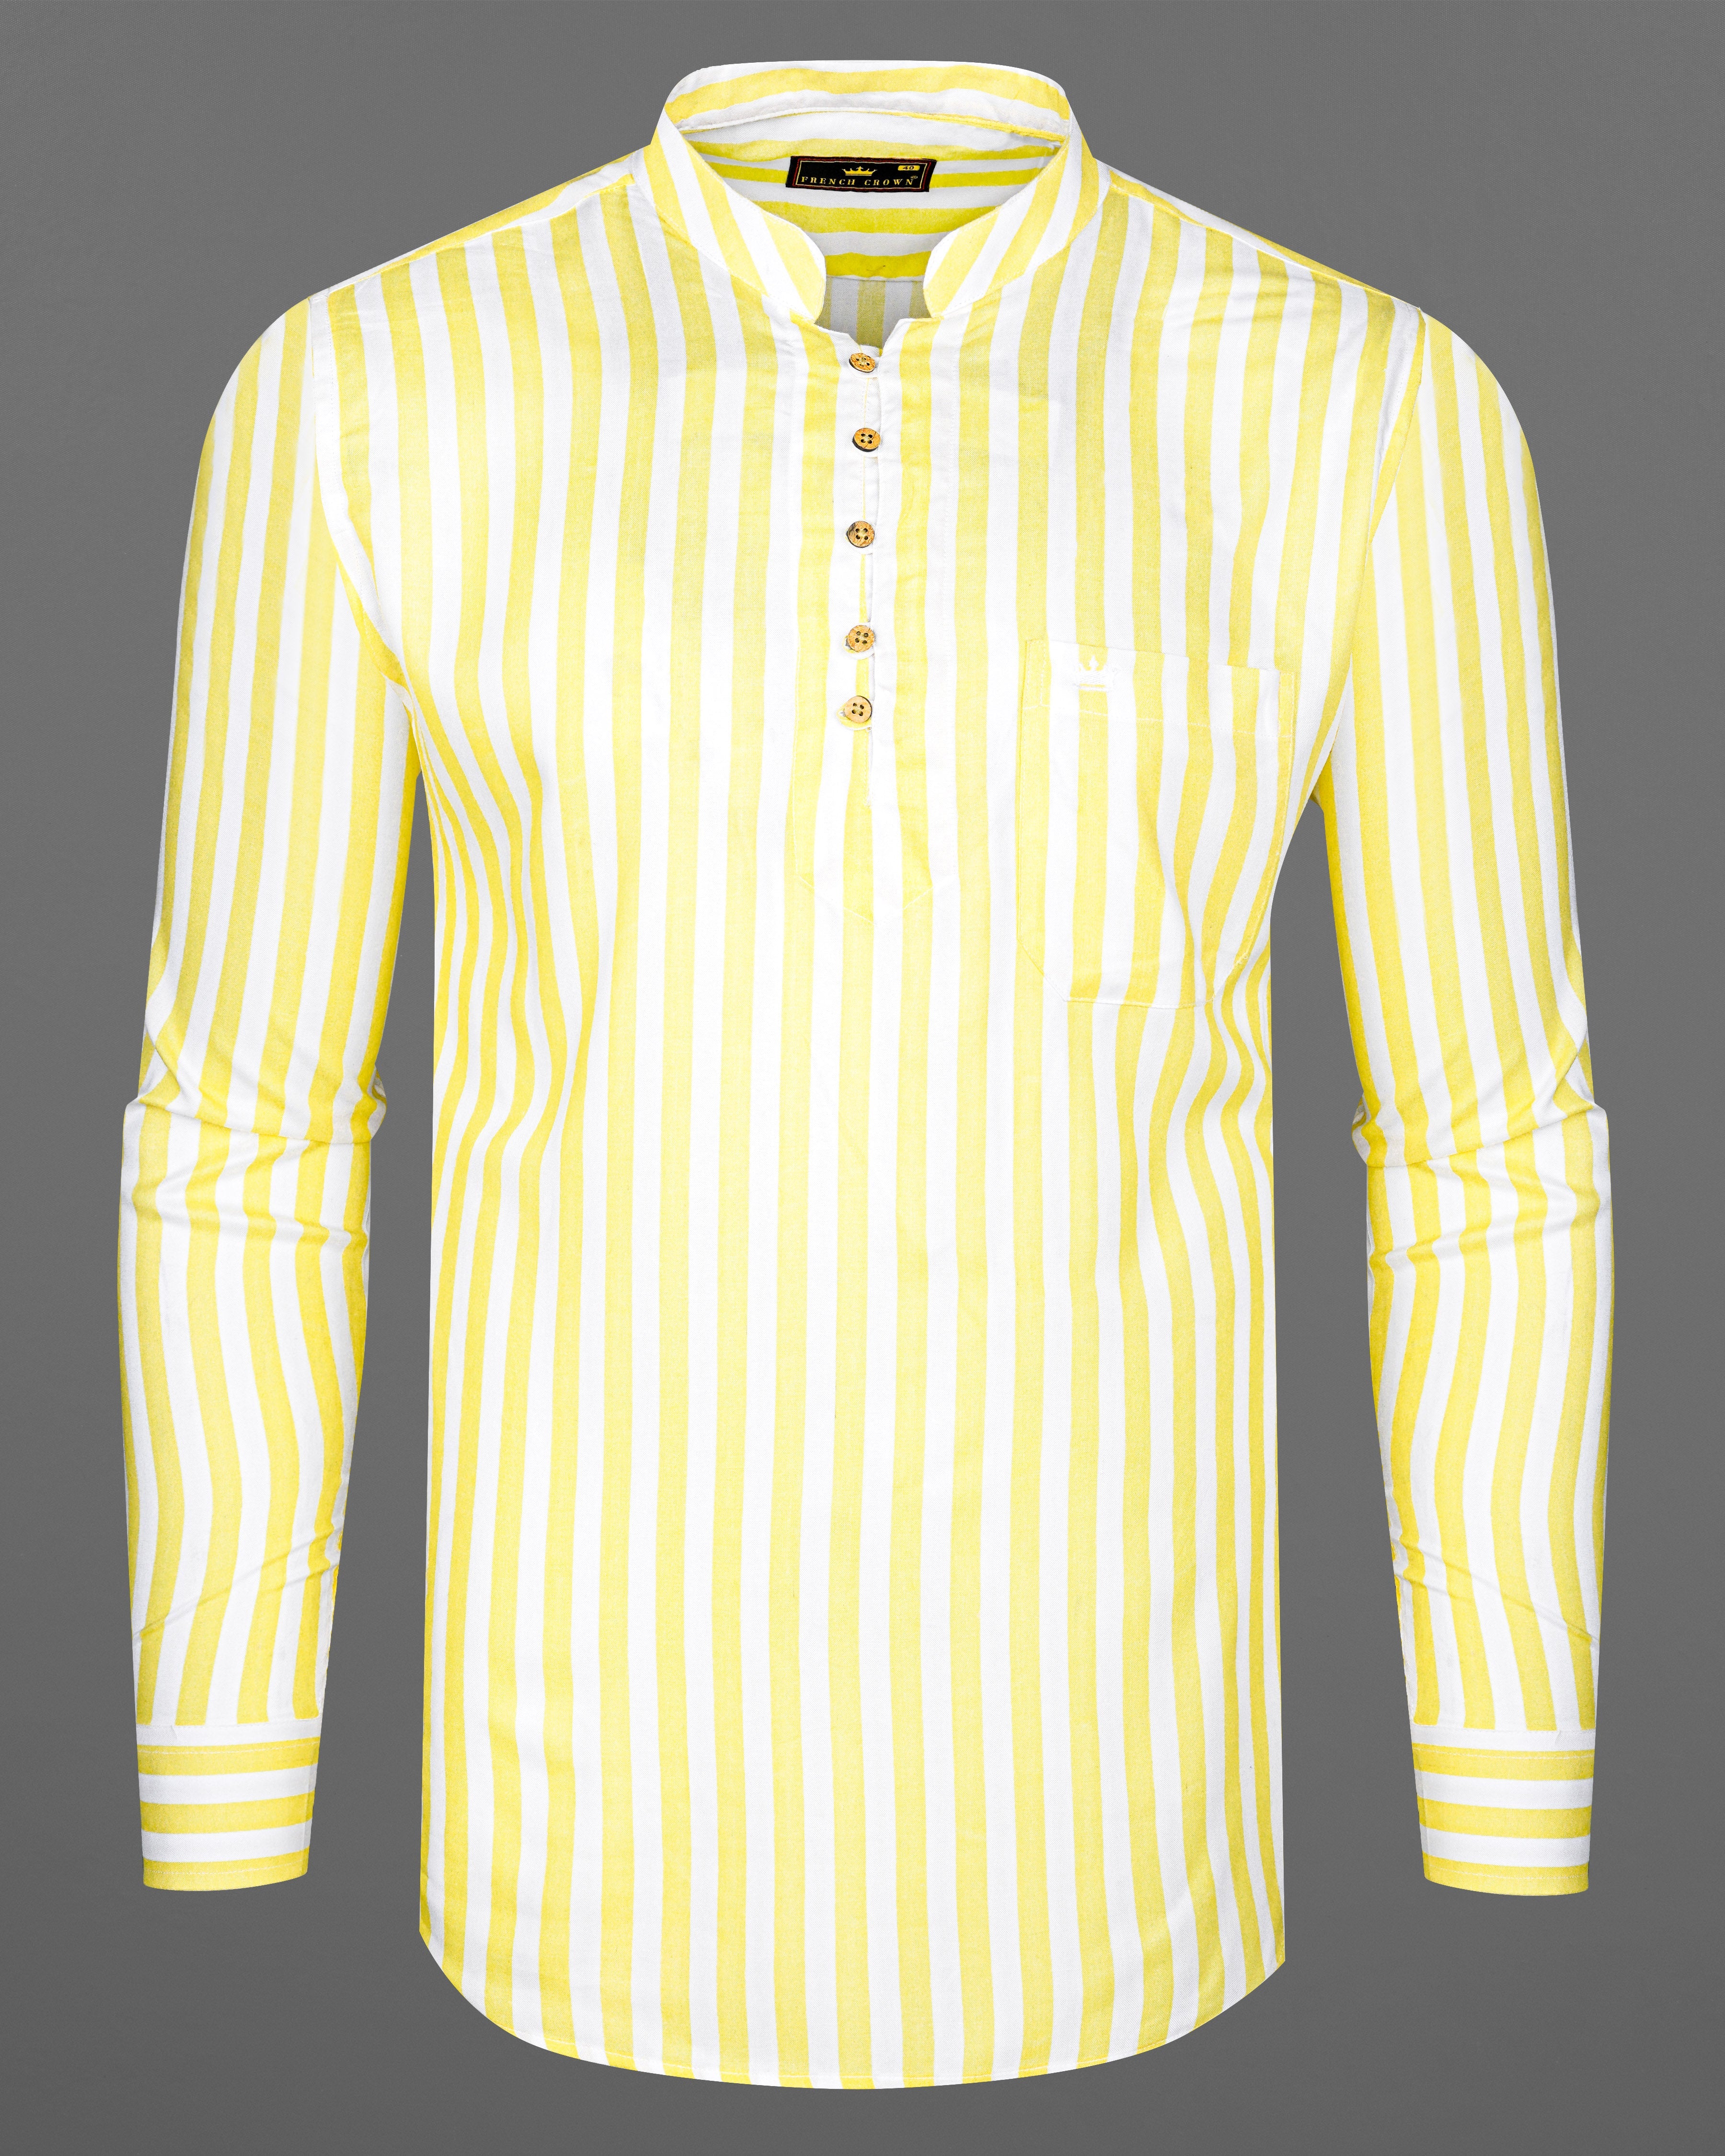 Bright White with Picasso Yellow Striped Premium Tencel Kurta Shirt 8250-KS-38, 8250-KS-H-38, 8250-KS-39, 8250-KS-H-39, 8250-KS-40, 8250-KS-H-40, 8250-KS-42, 8250-KS-H-42, 8250-KS-44, 8250-KS-H-44, 8250-KS-46, 8250-KS-H-46, 8250-KS-48, 8250-KS-H-48, 8250-KS-50, 8250-KS-H-50, 8250-KS-52, 8250-KS-H-52